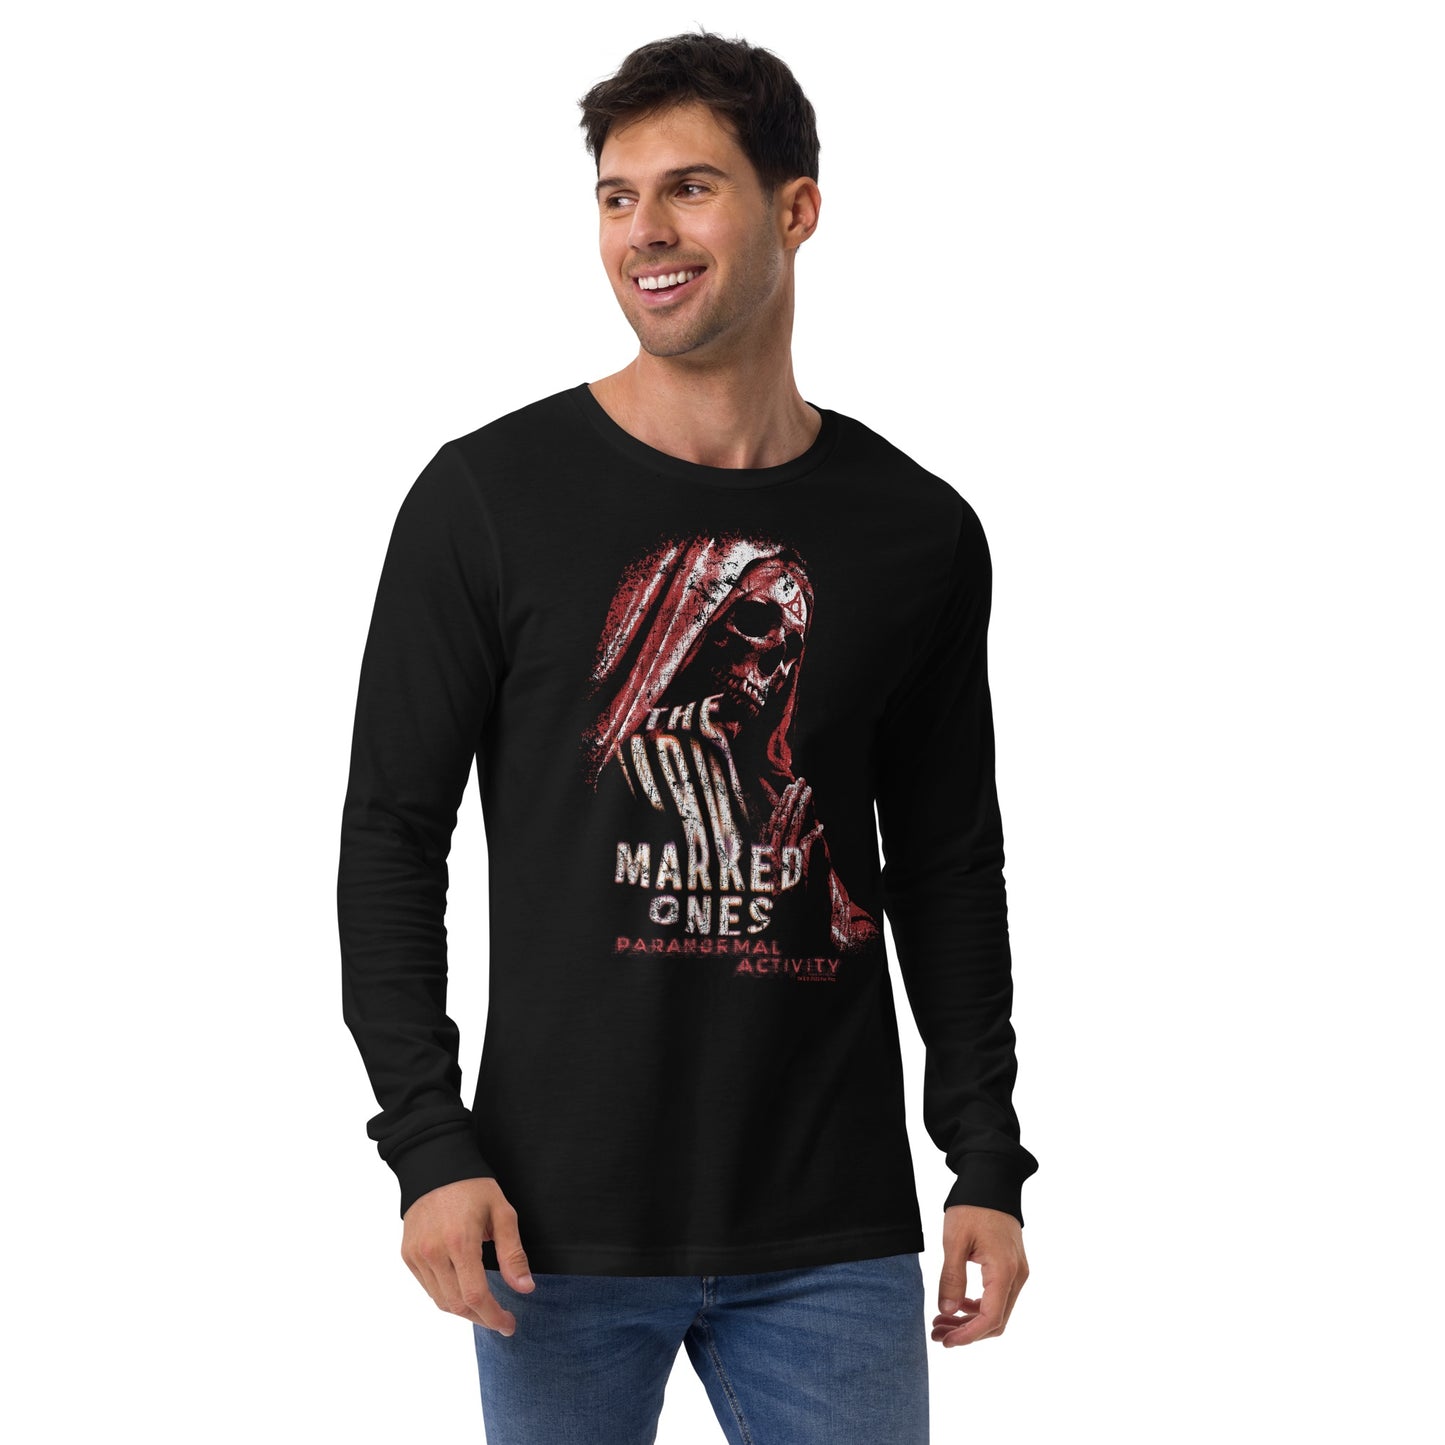 Paranormal Activity The Marked Ones Long Sleeve T-Shirt